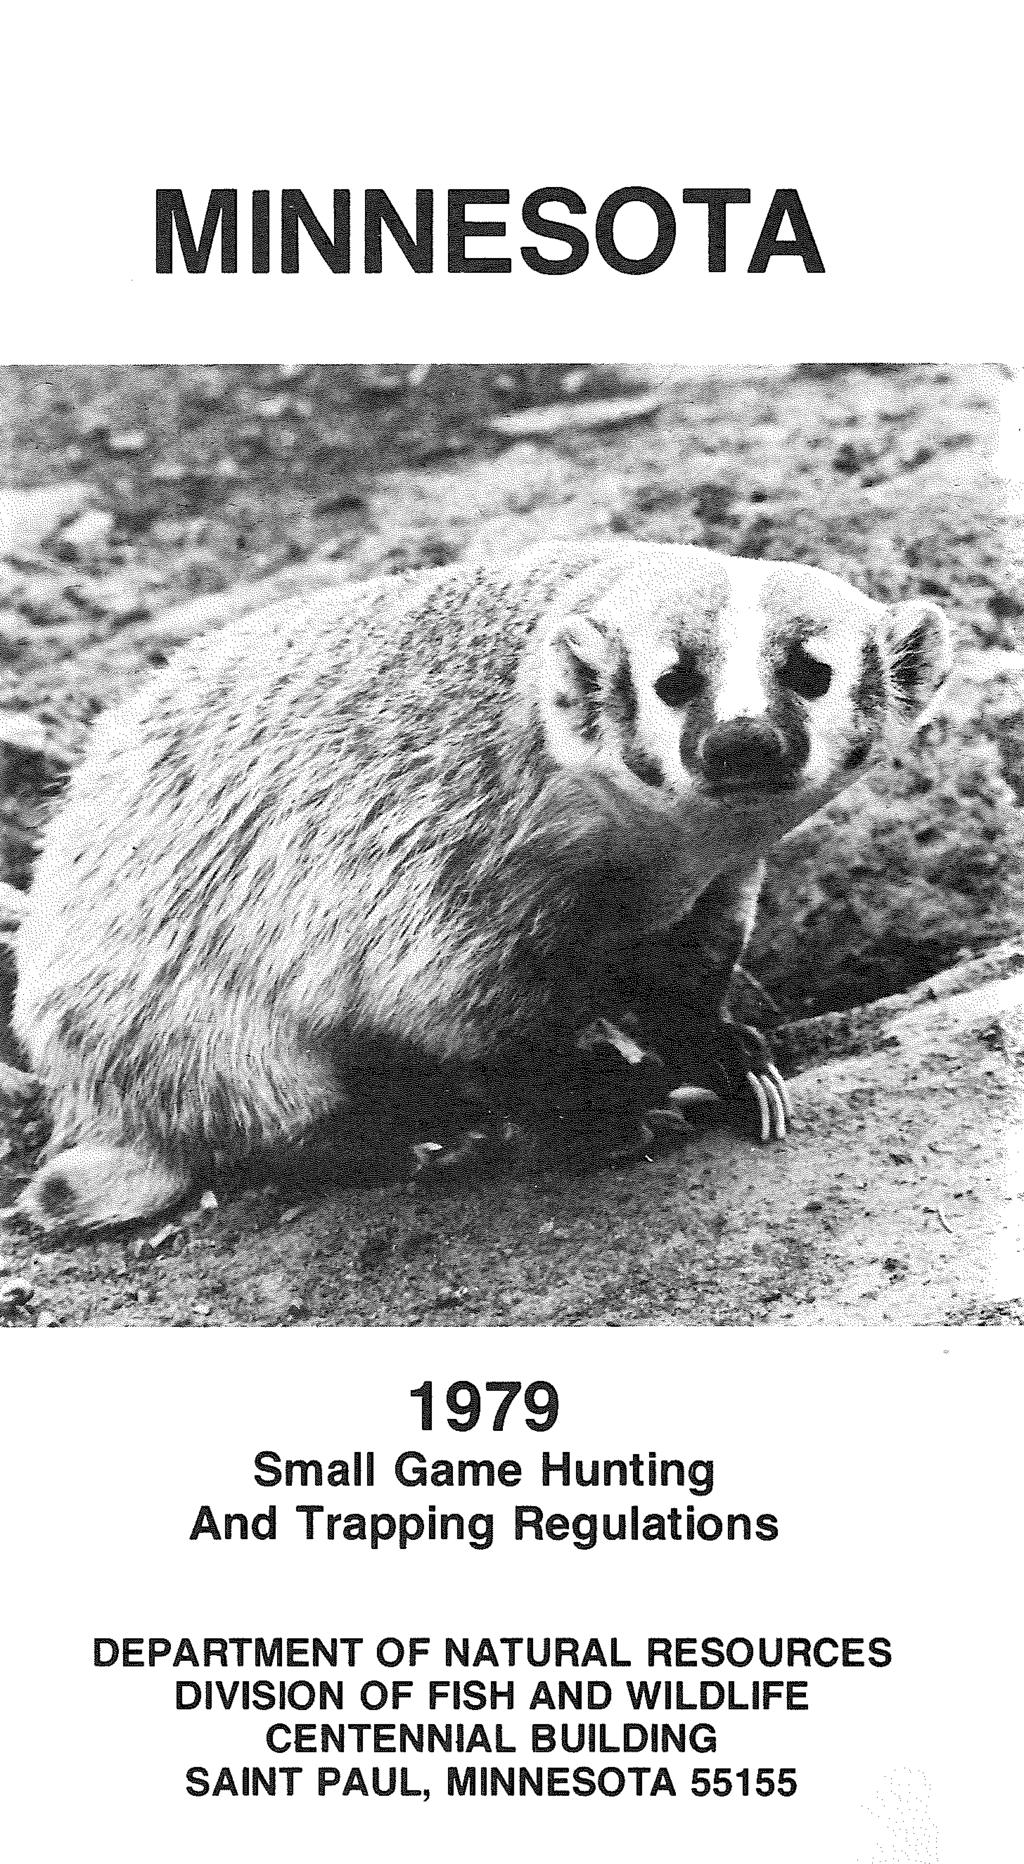 I 1979 Small Game Hunting And Trapping Regulations DEPARTMENT OF NATURAL